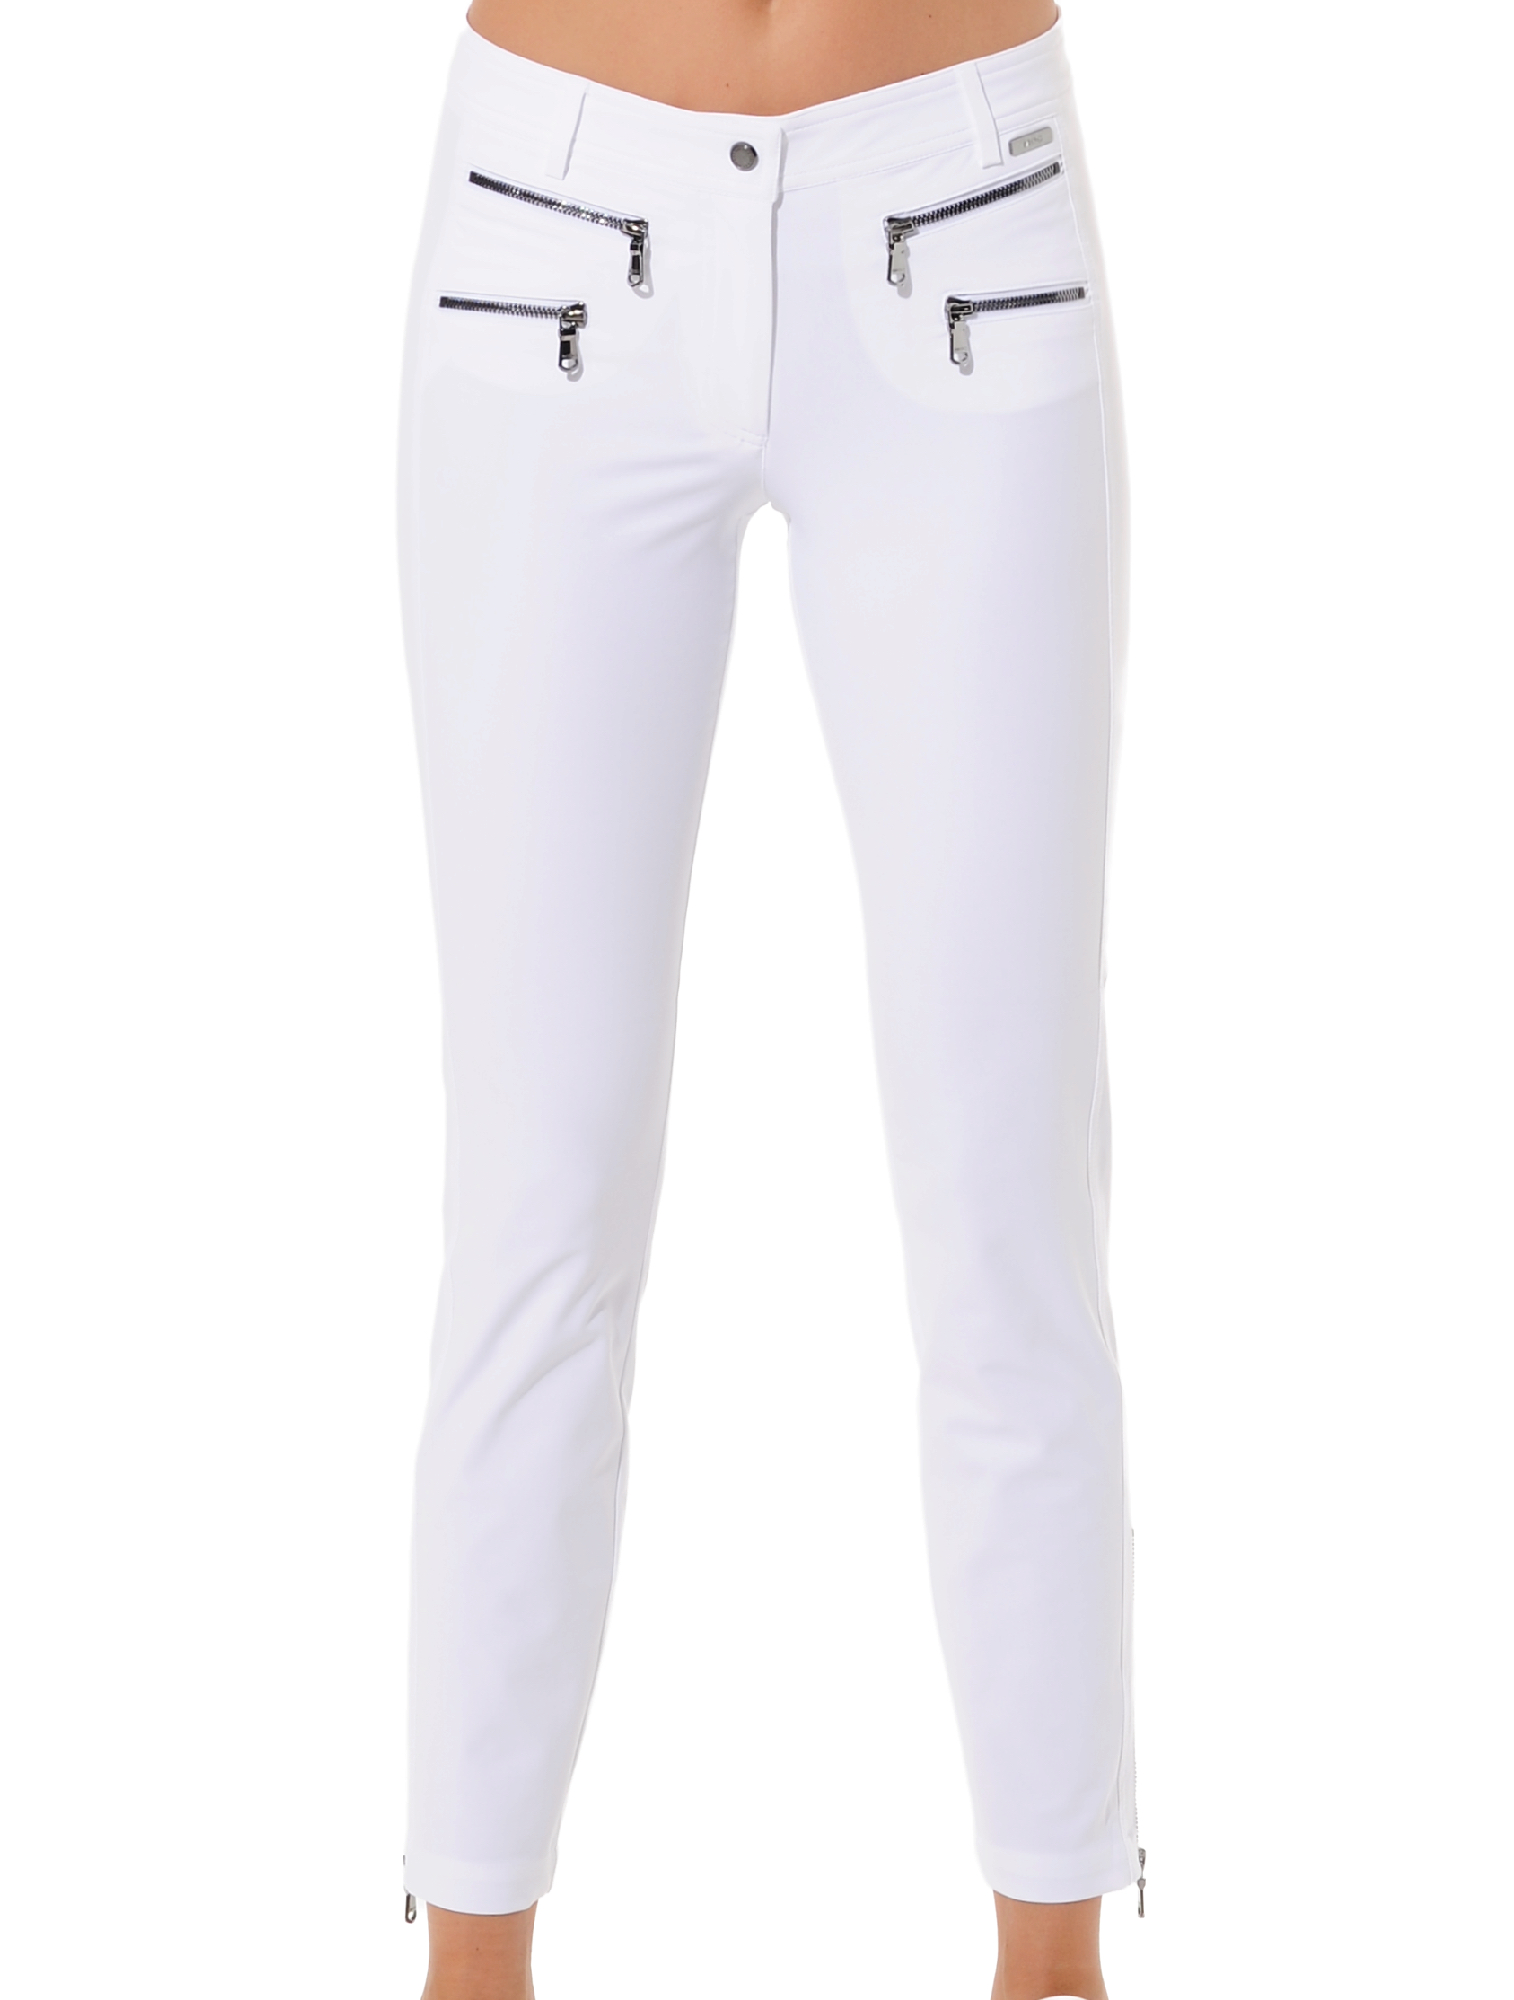 4way stretch double zip ankle pants white 